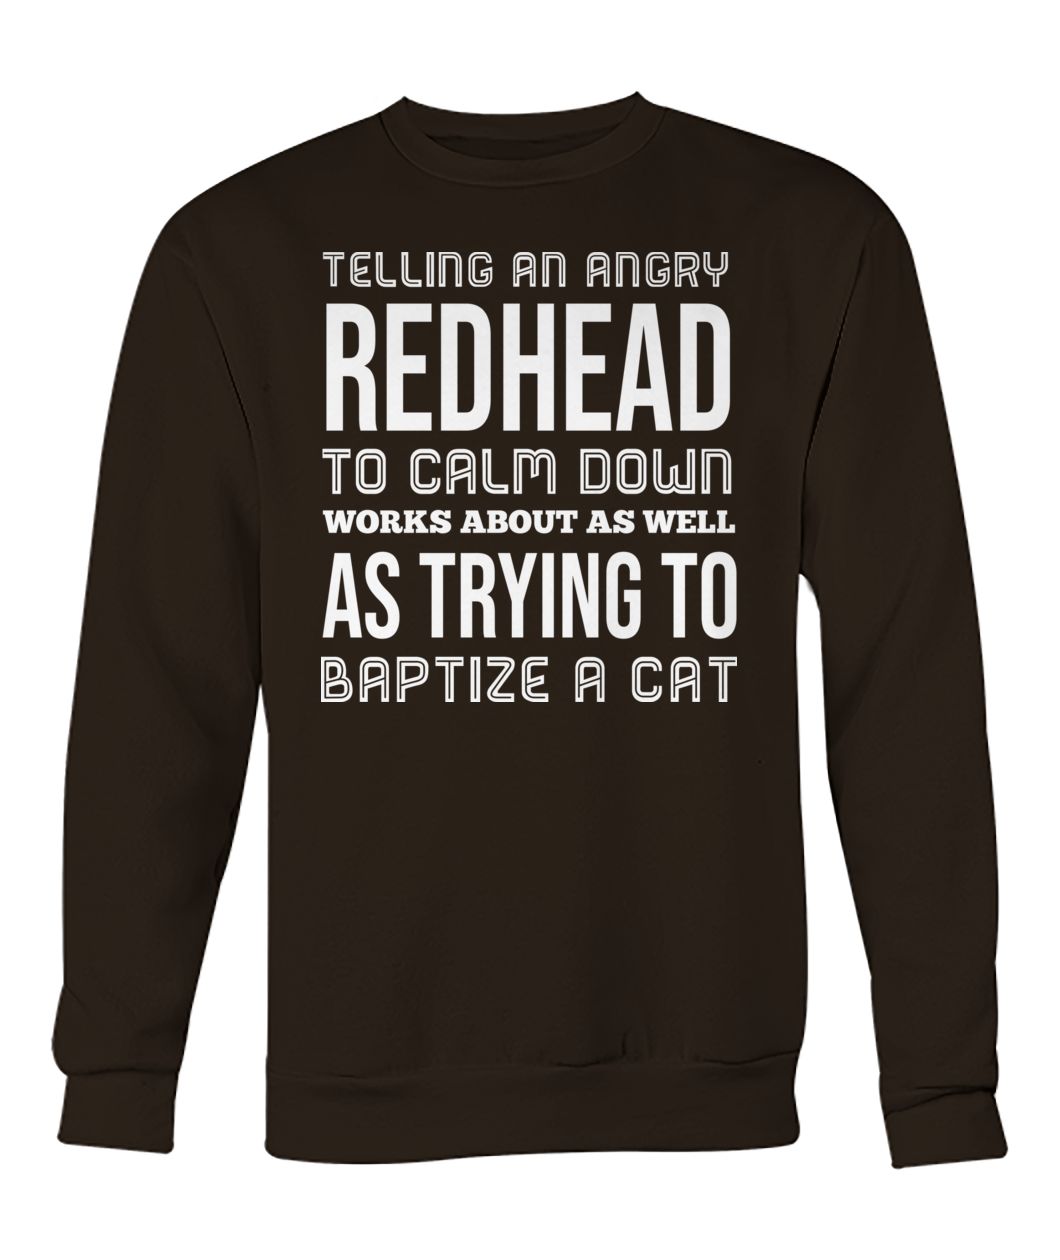 Telling an angry redhead to calm down works about as well as trying to baptize a cat crew neck sweatshirt